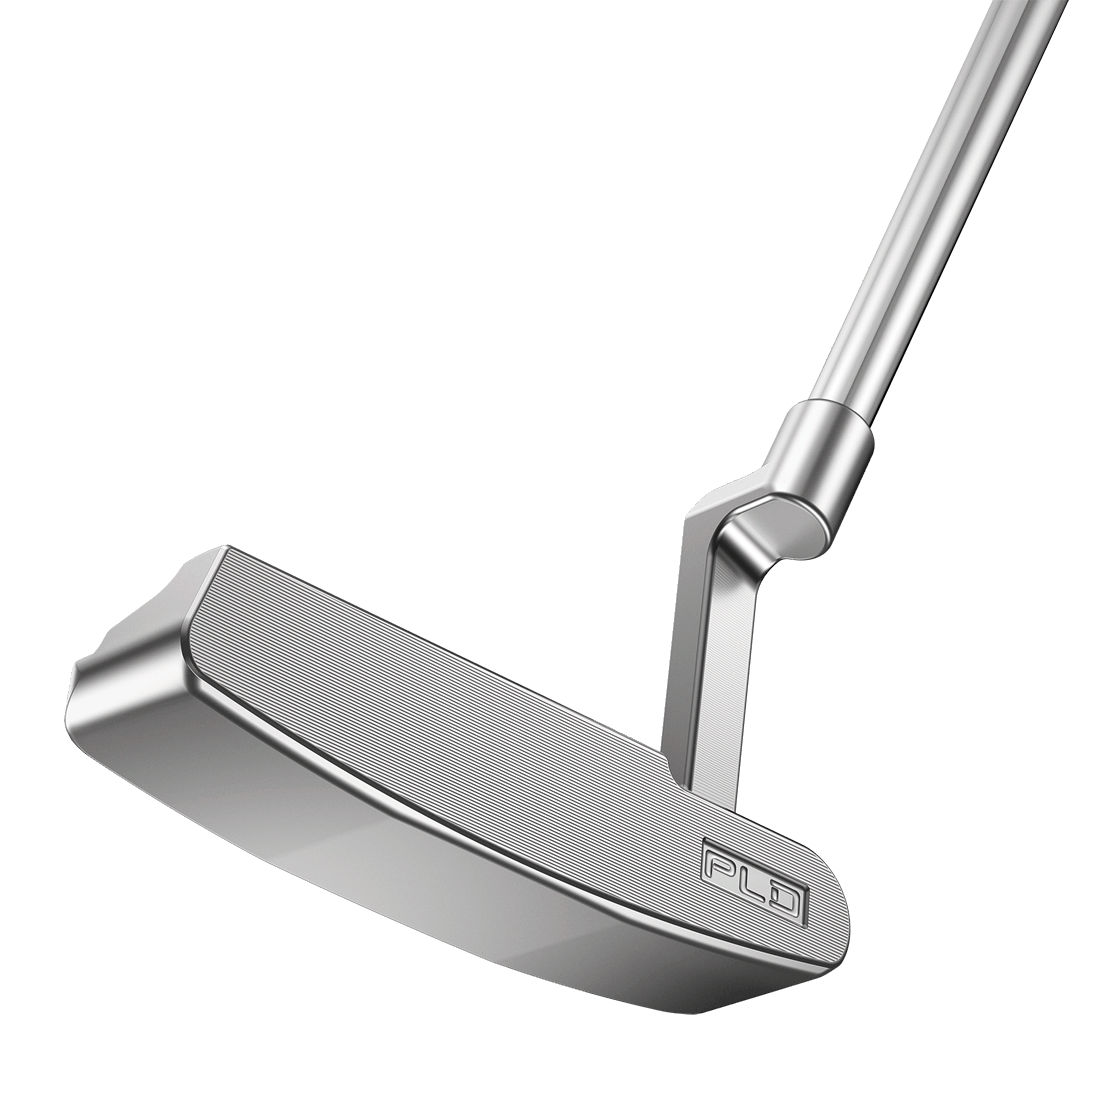 face view of Steel Anser Patent 55 putter